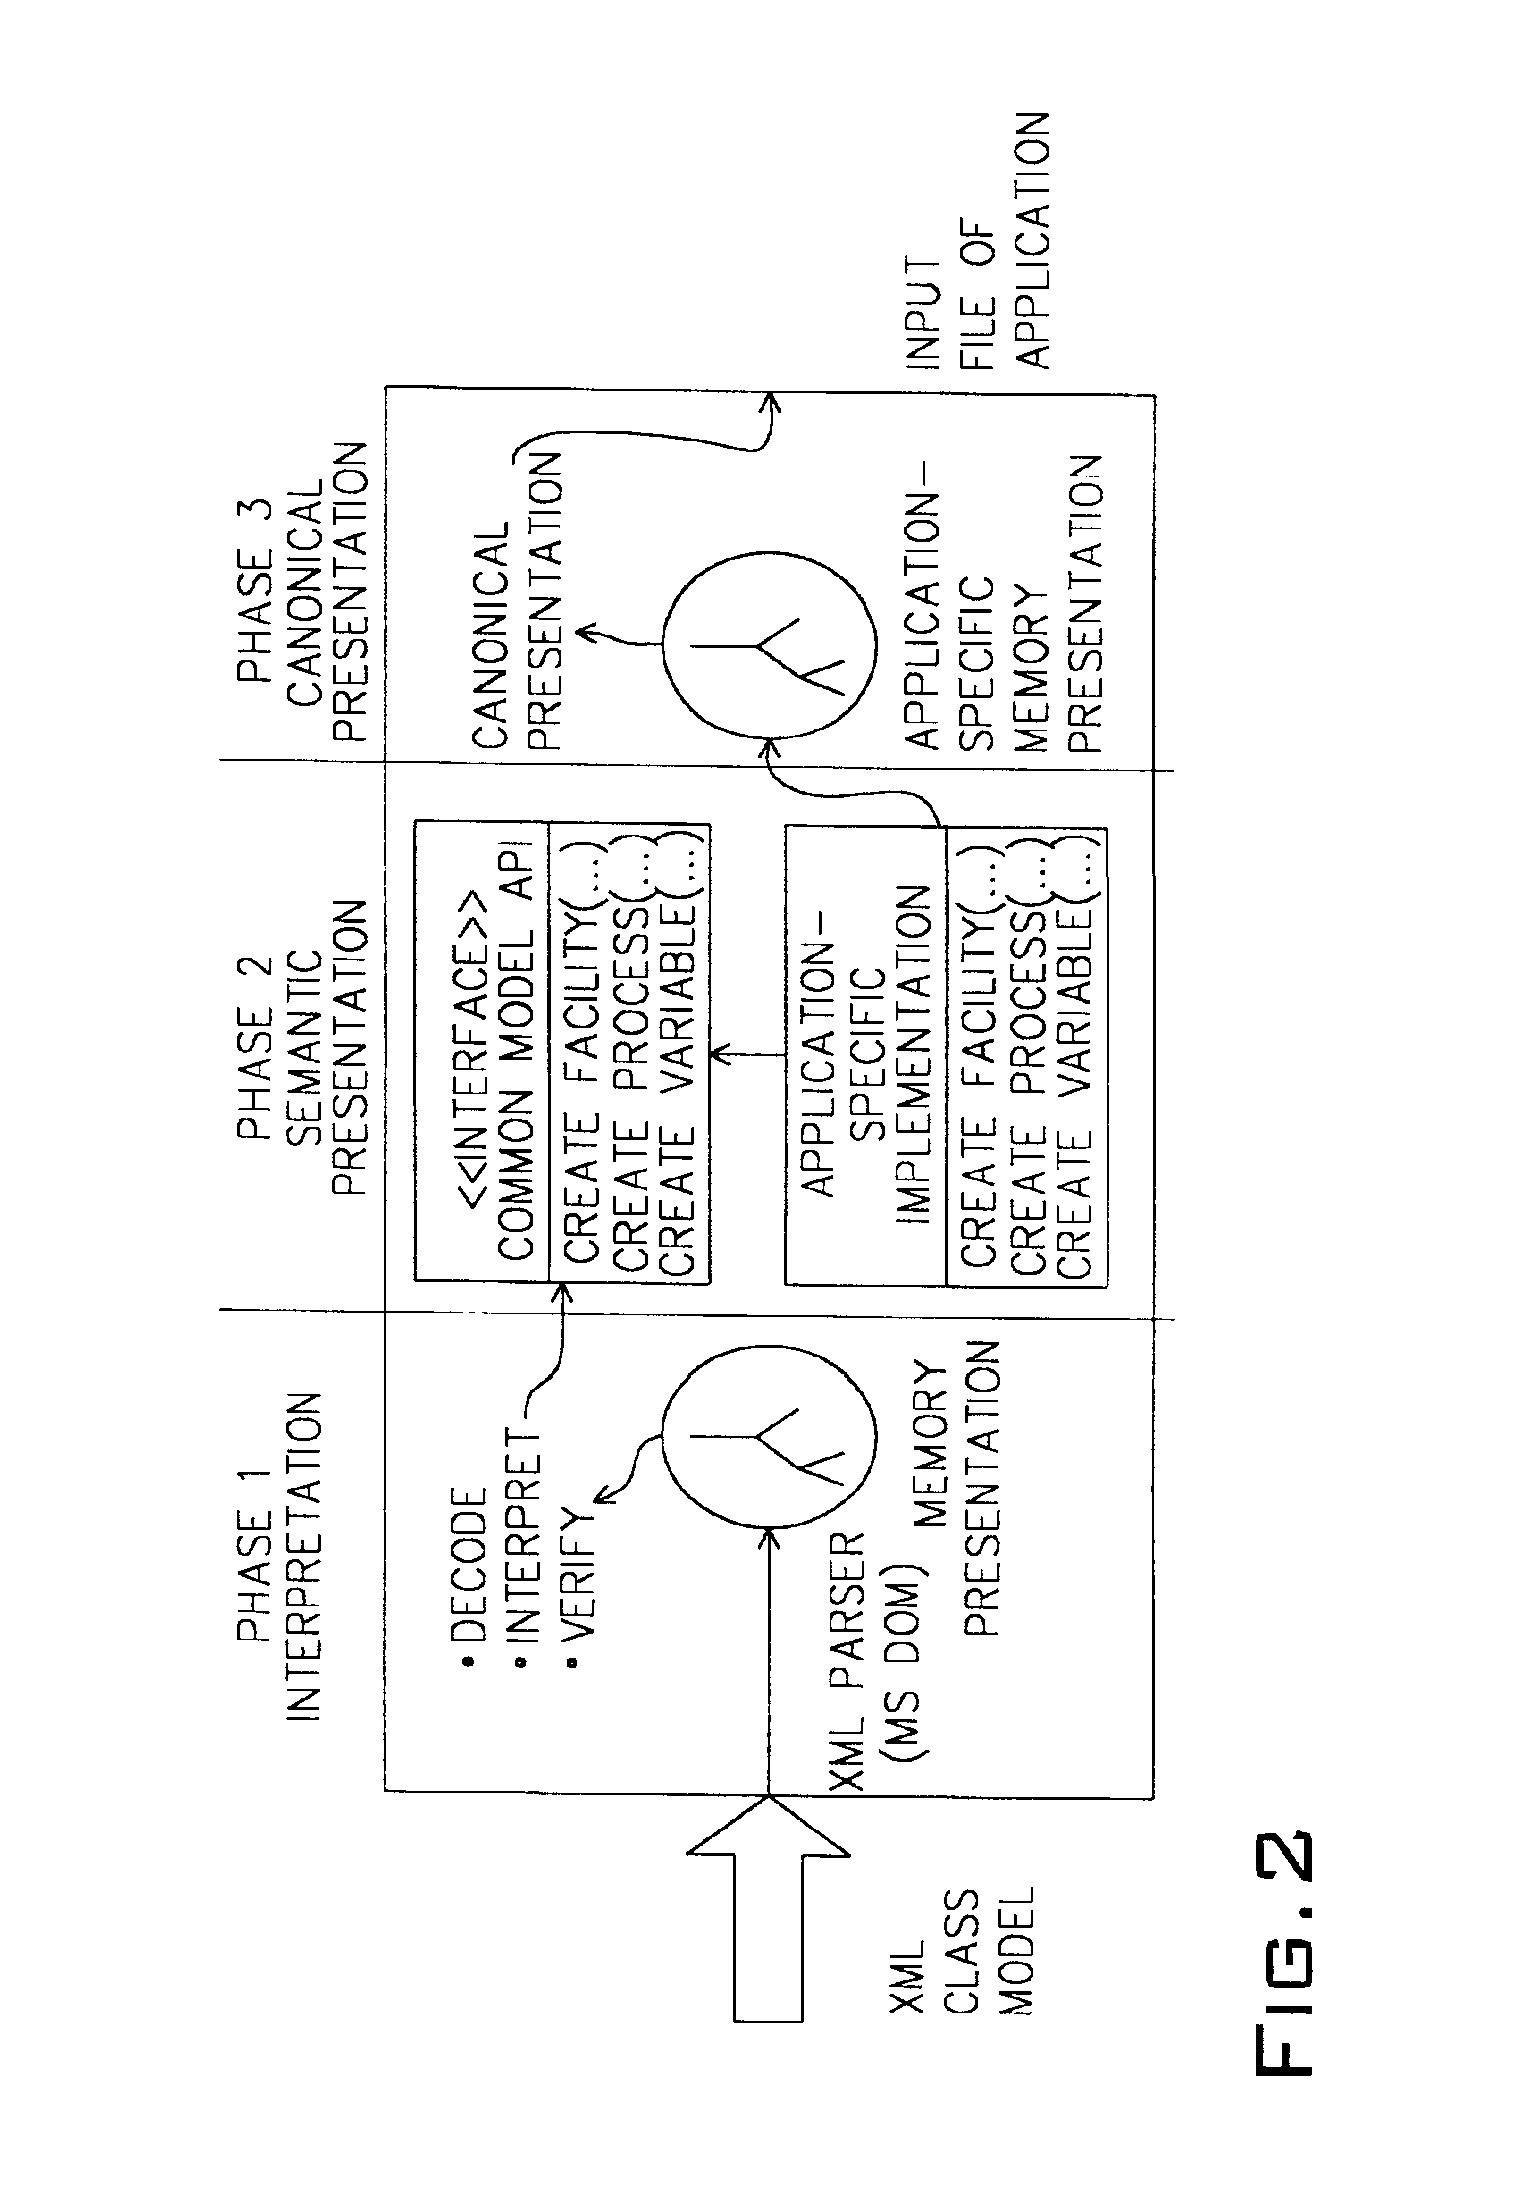 Method for generating application specific input files